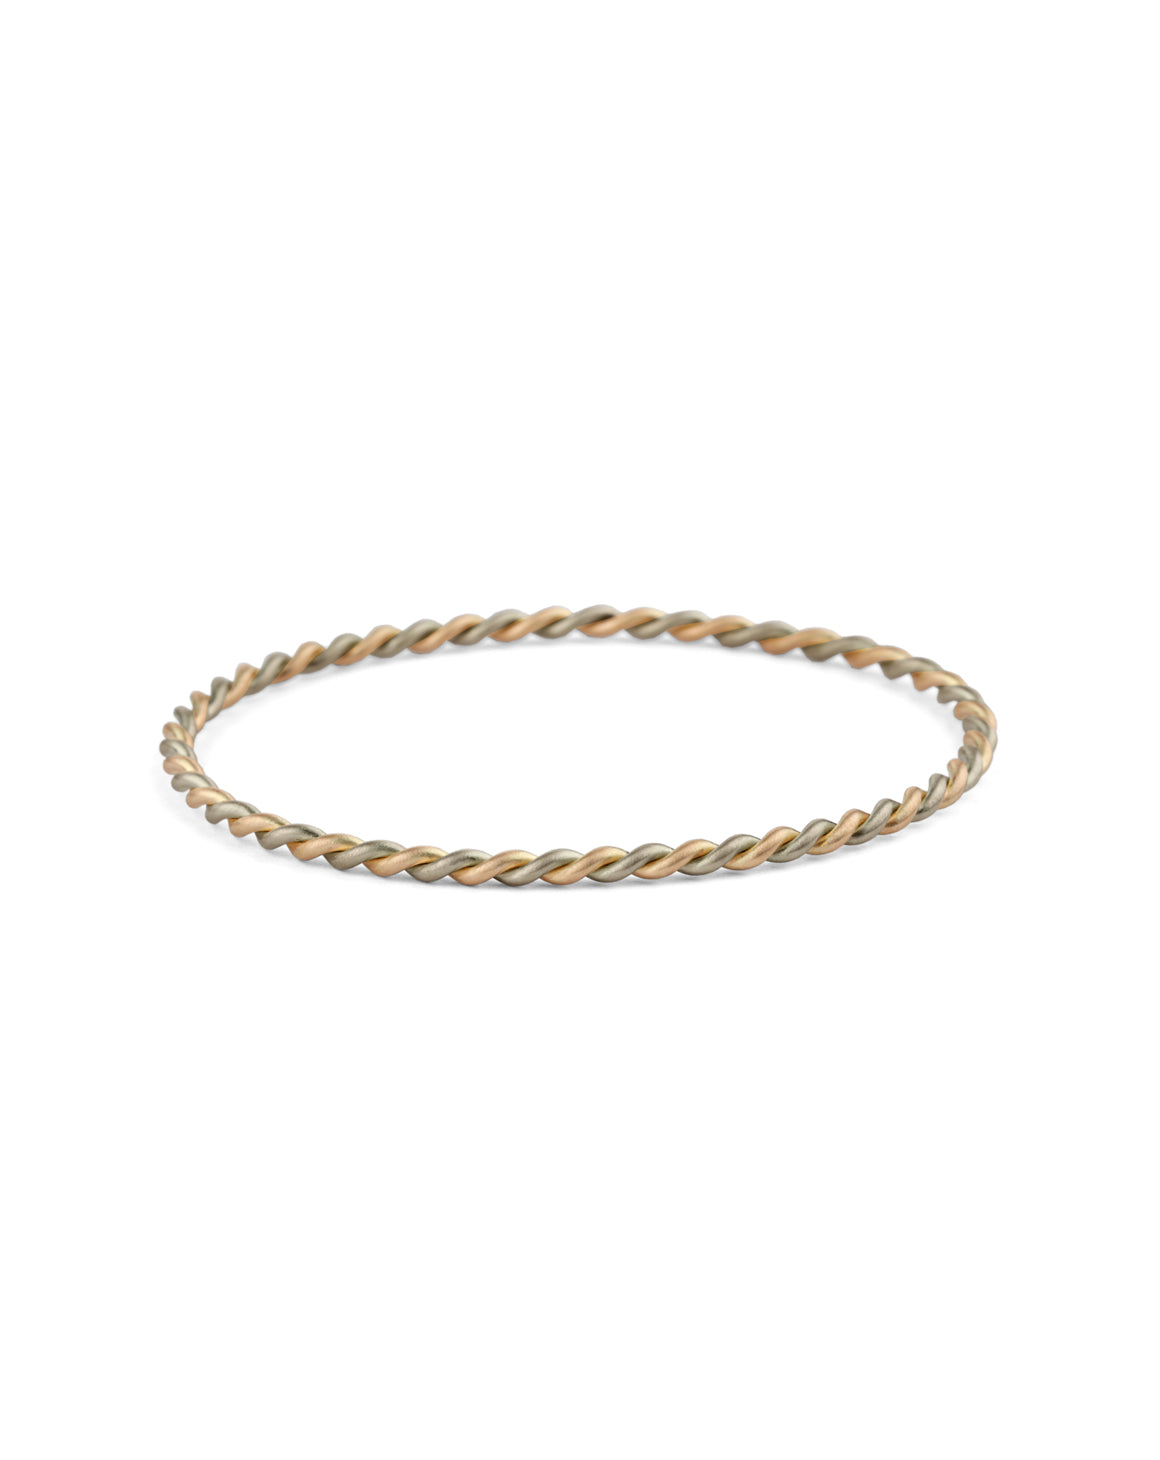 Two Strand Rope Bangle - mixed metal - standard